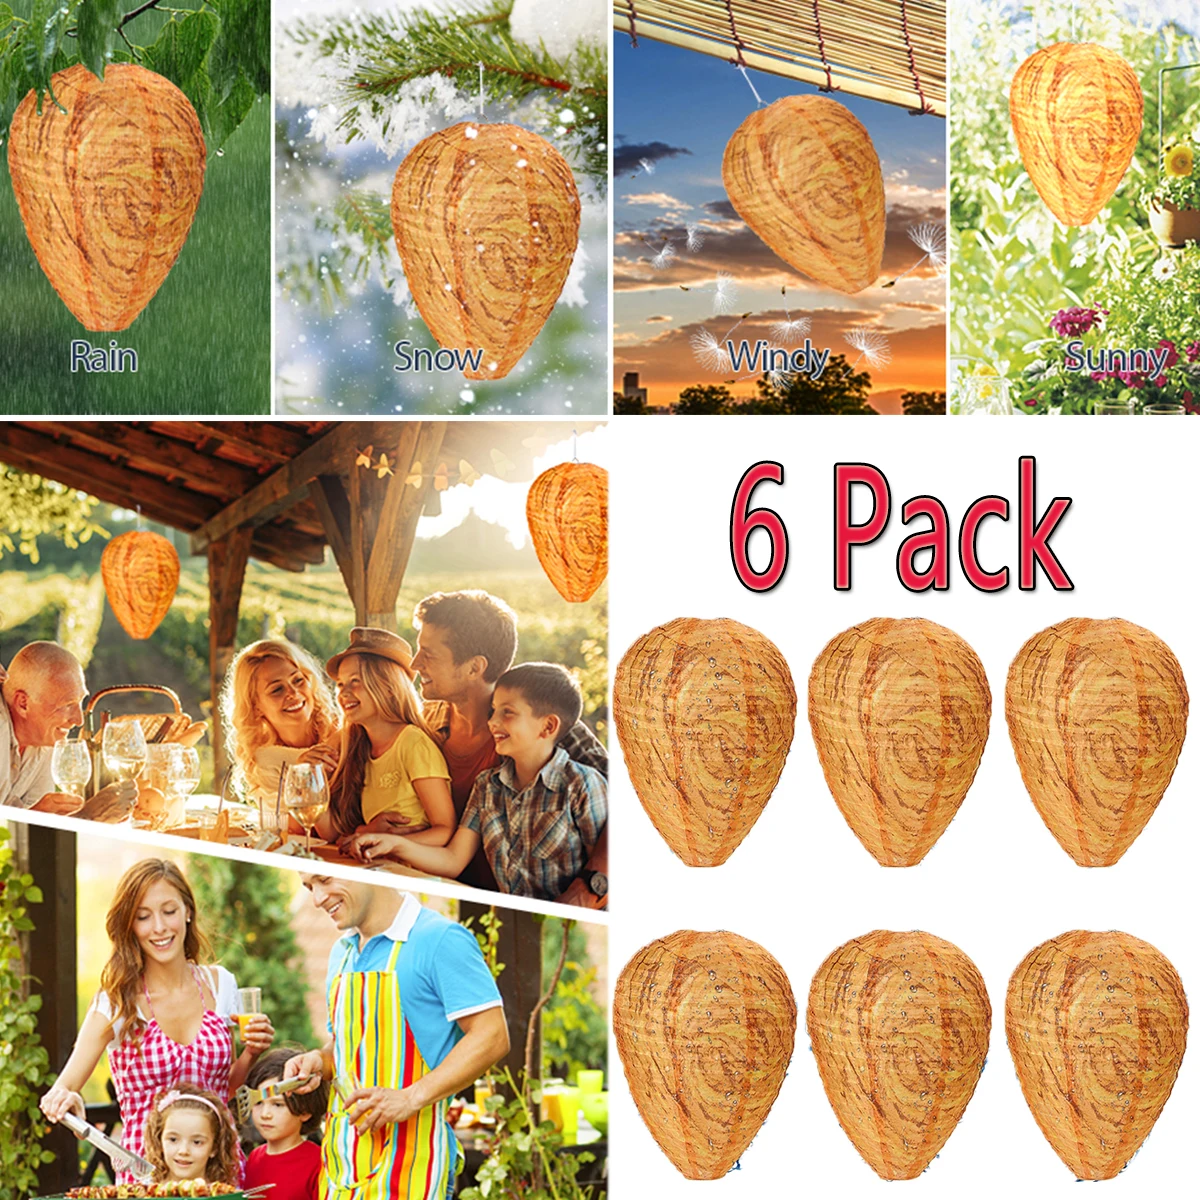 6Pack Wasp Nest Decoy Fake Wasp Nest Non-Toxic Waterproof Wasp Deterrent Repellent for Garden Hornets Hanging Wasp Trap